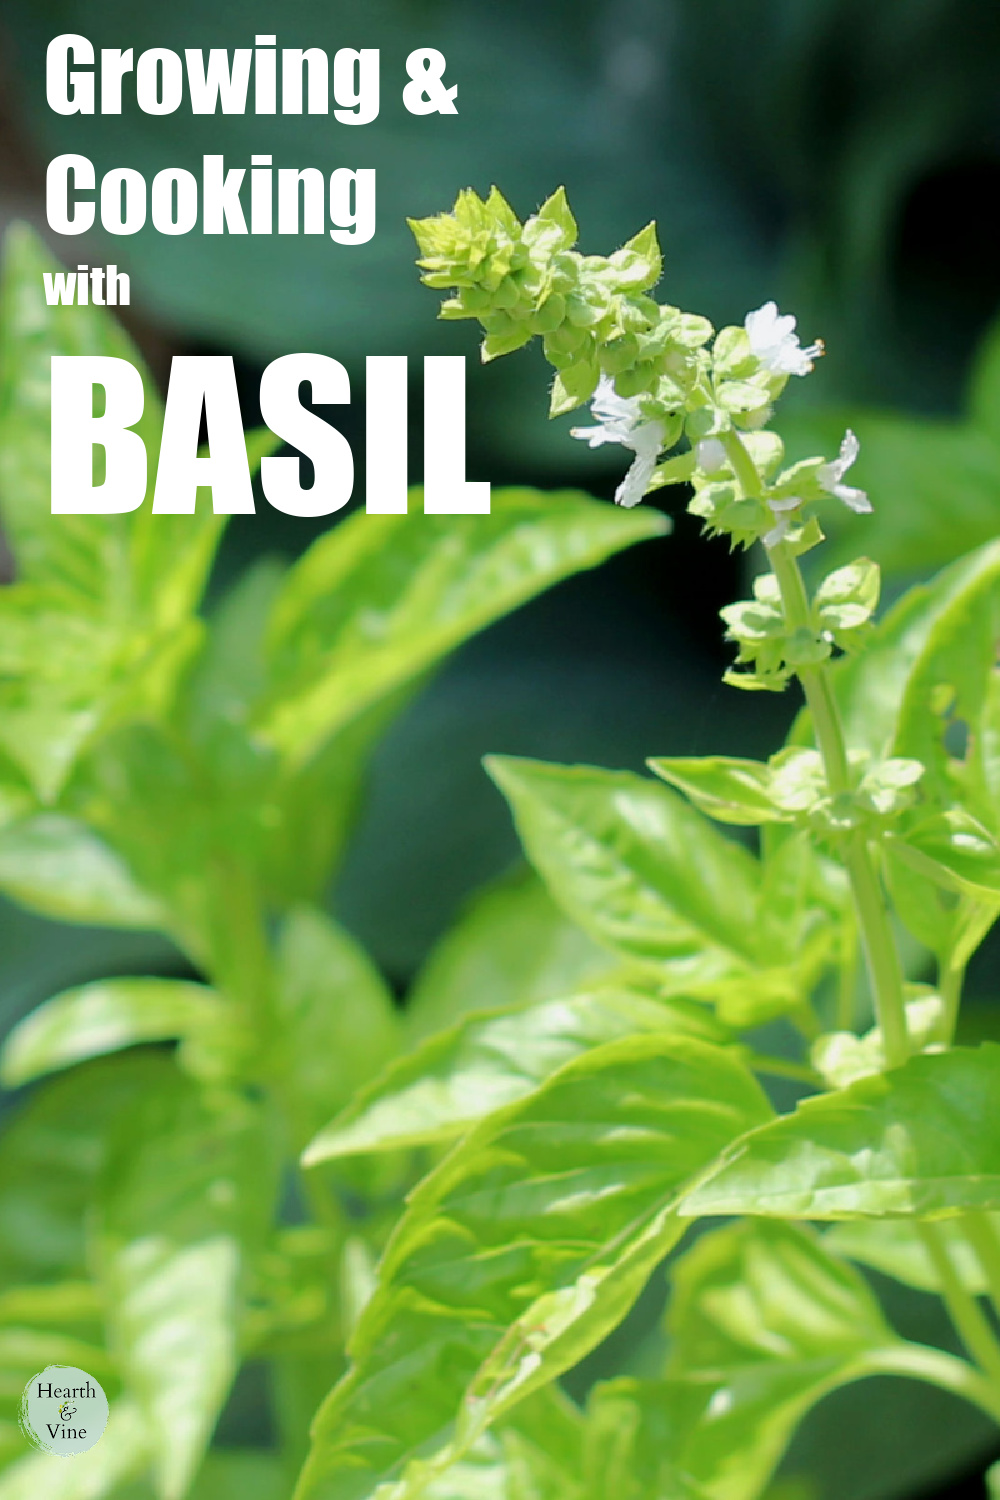 Basil plant just starting to flower.